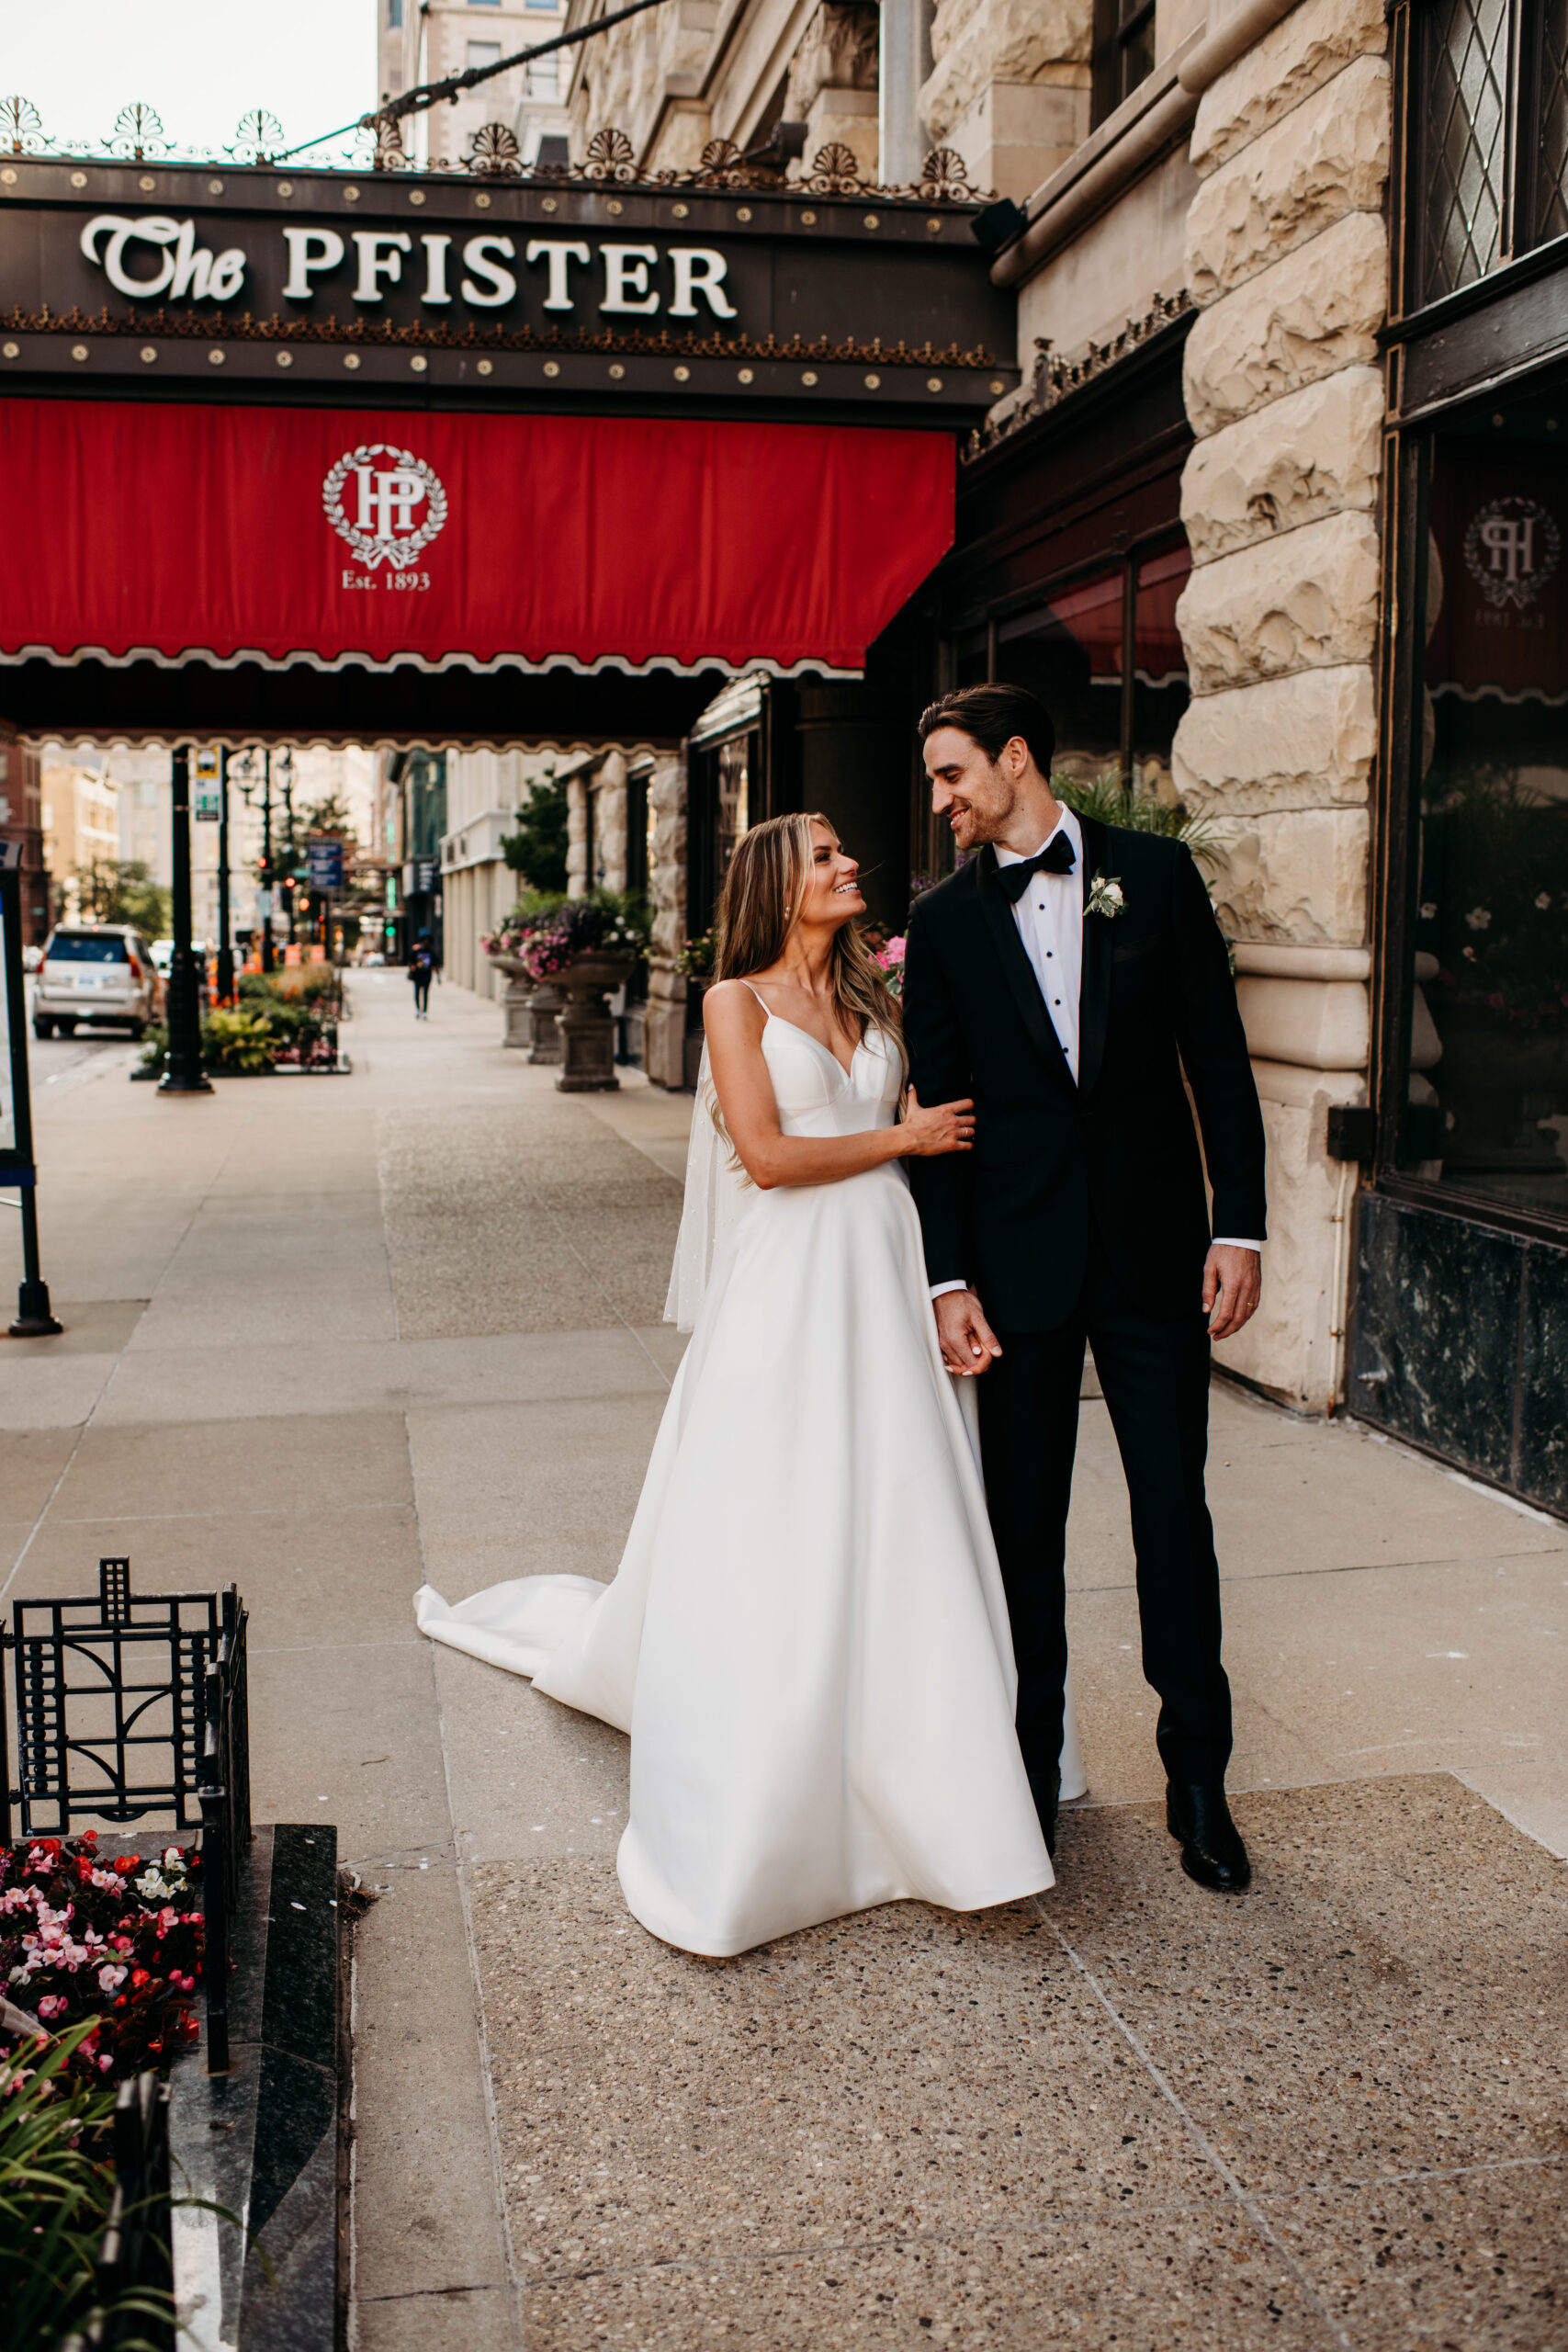 bride and groom in classic black and white wedding attire standing in front of the Pfister Hotel Wedding venue looking at each other